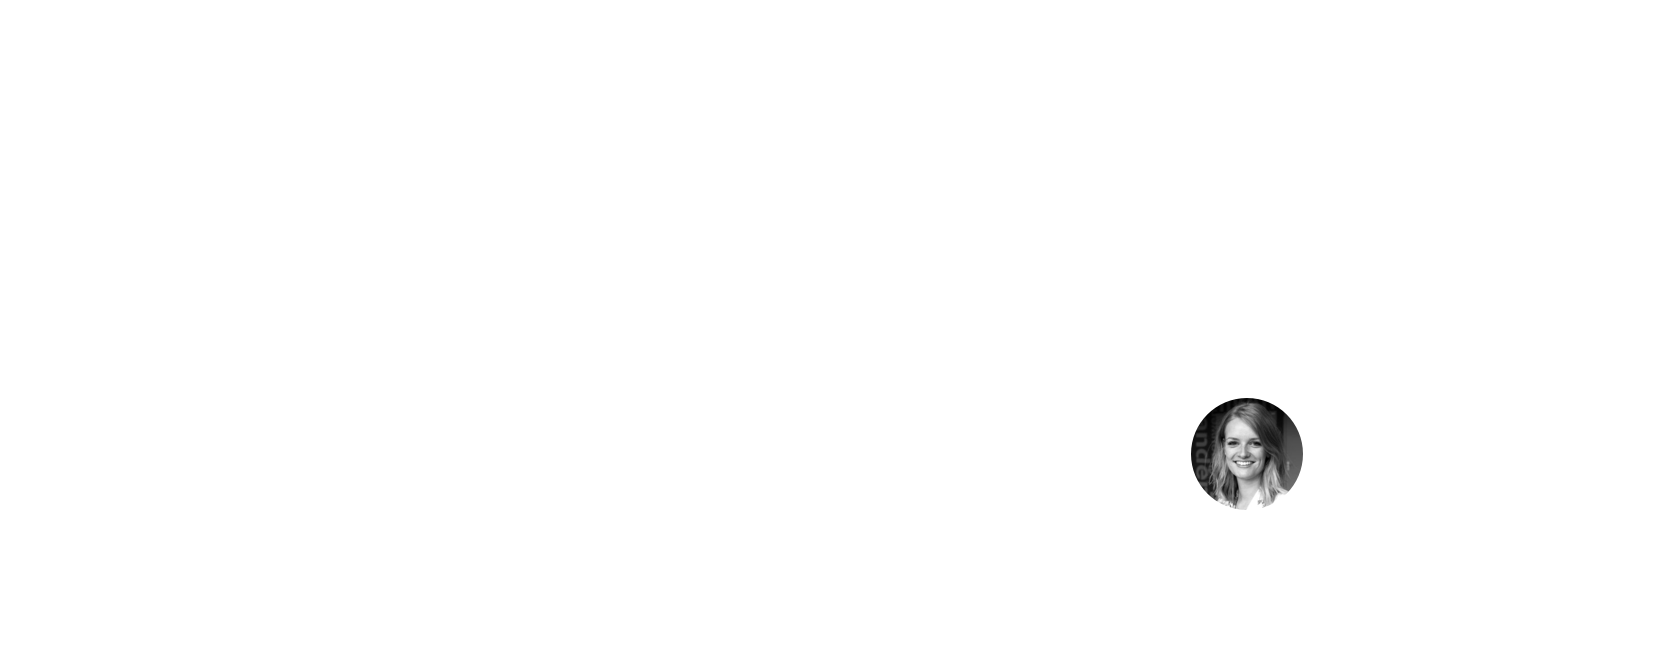 Testimonial The Self-Made Summit 2019 Business Carriere Event Ambitieuze Zakenvrouwen Freelancers Paulien Zwiers.png